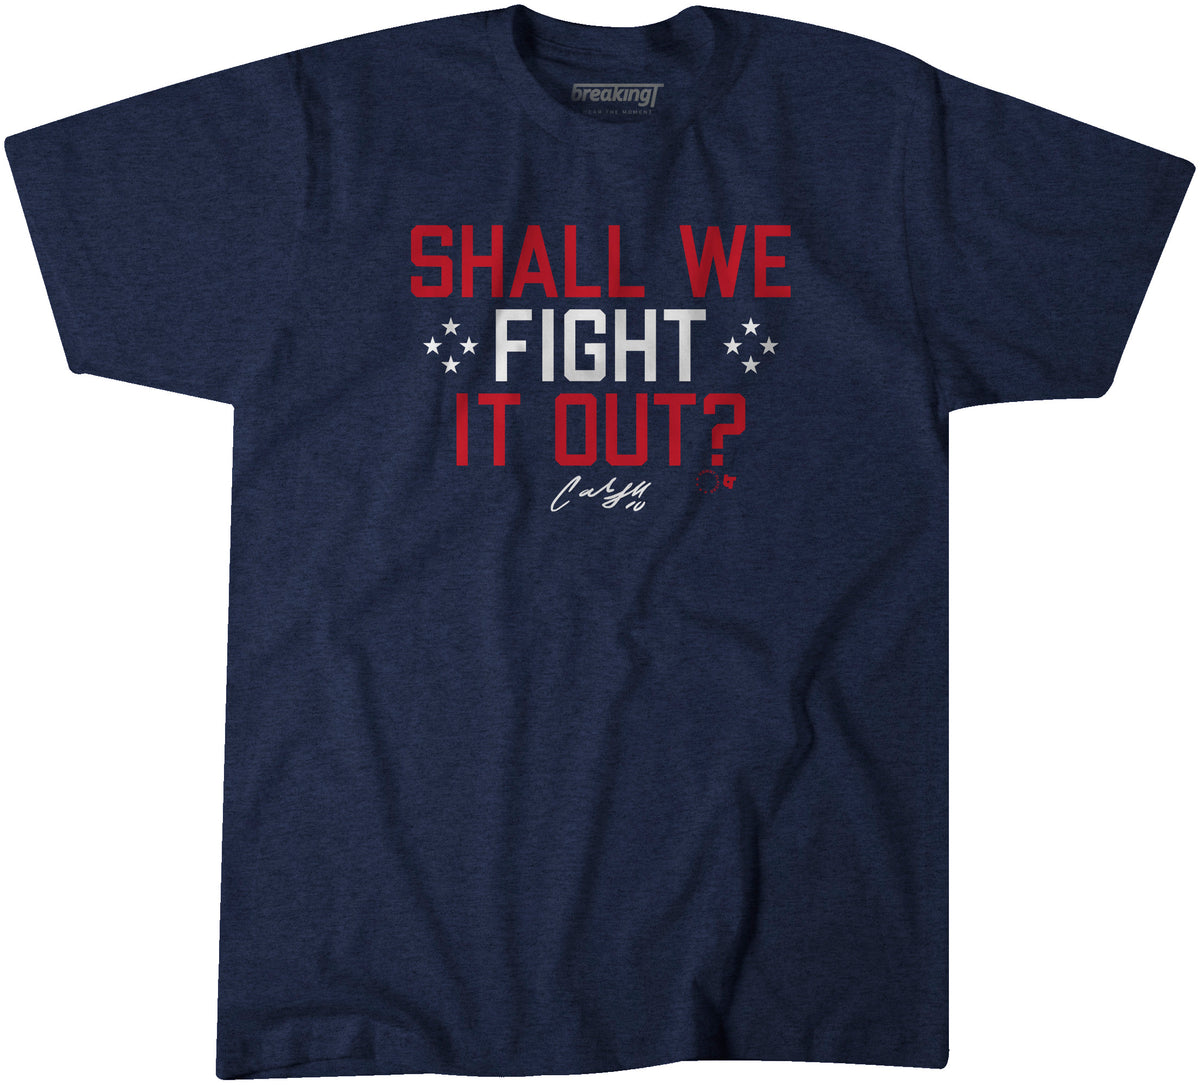 Shall We Fight it Out Shirt, Hoodie - USWNTPA Licensed - BreakingT